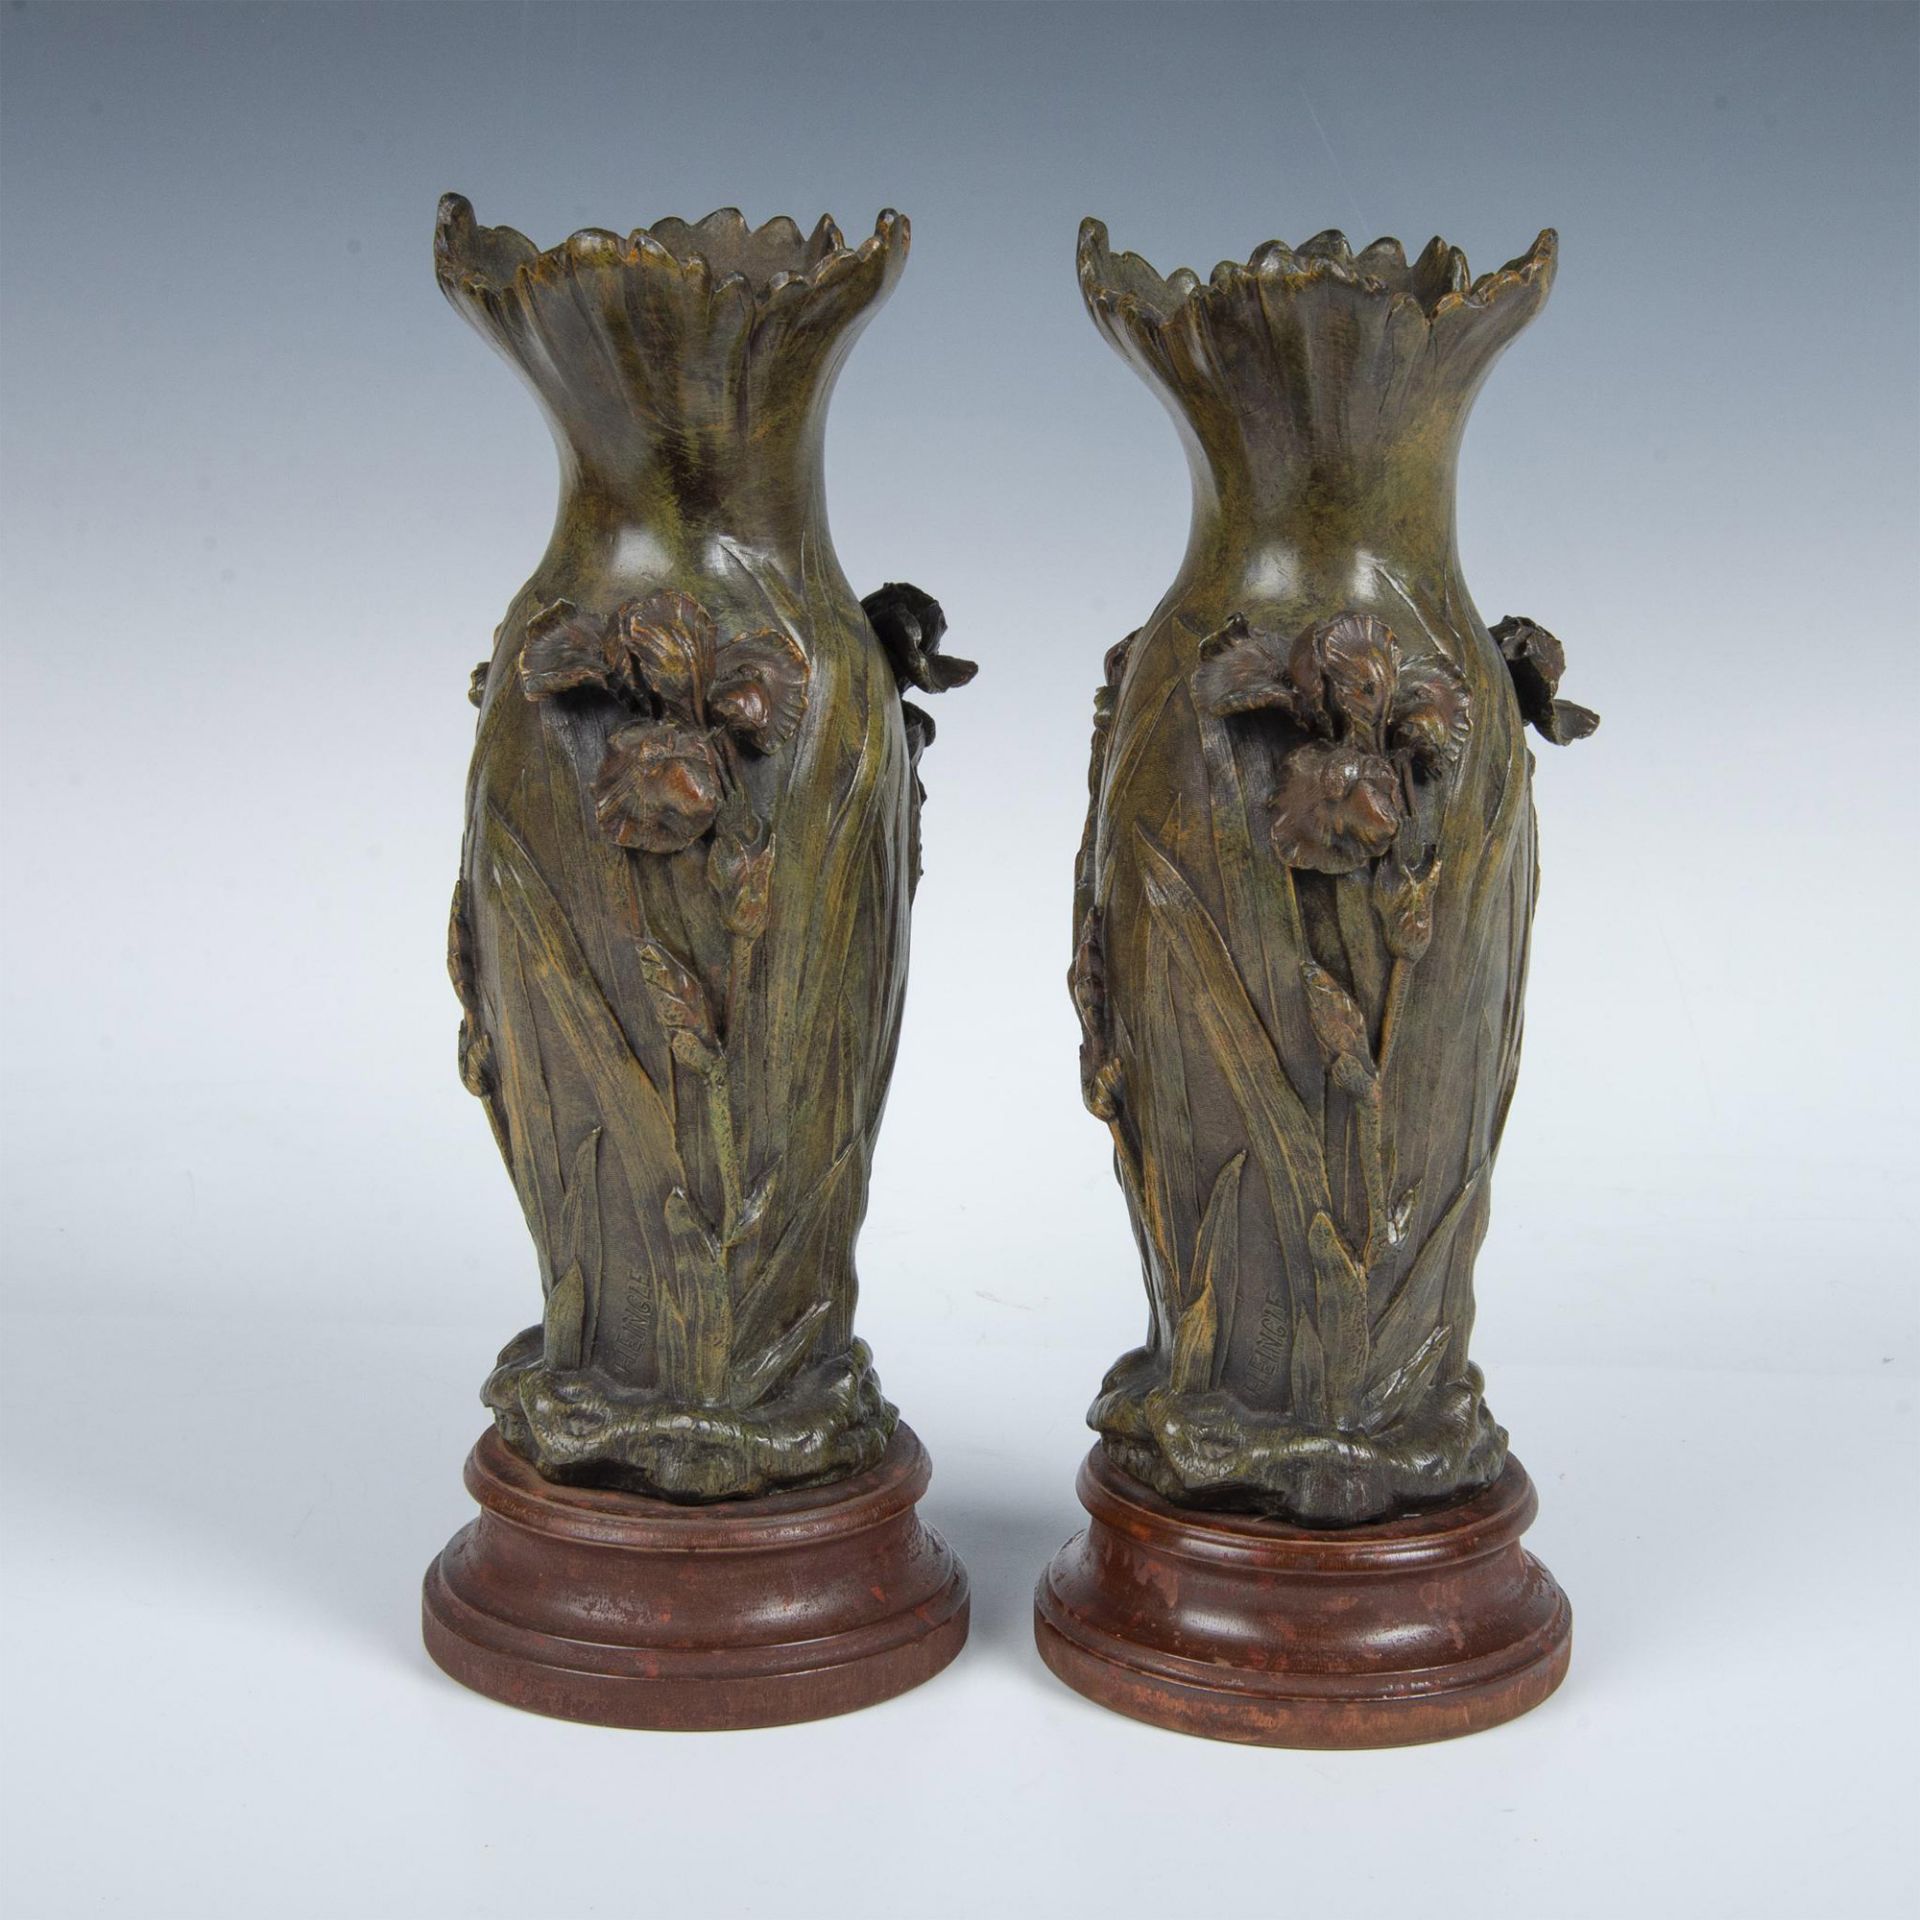 Heingle, Pair of Art Nouveau Patinated Bronze Vases, Signed - Image 3 of 5